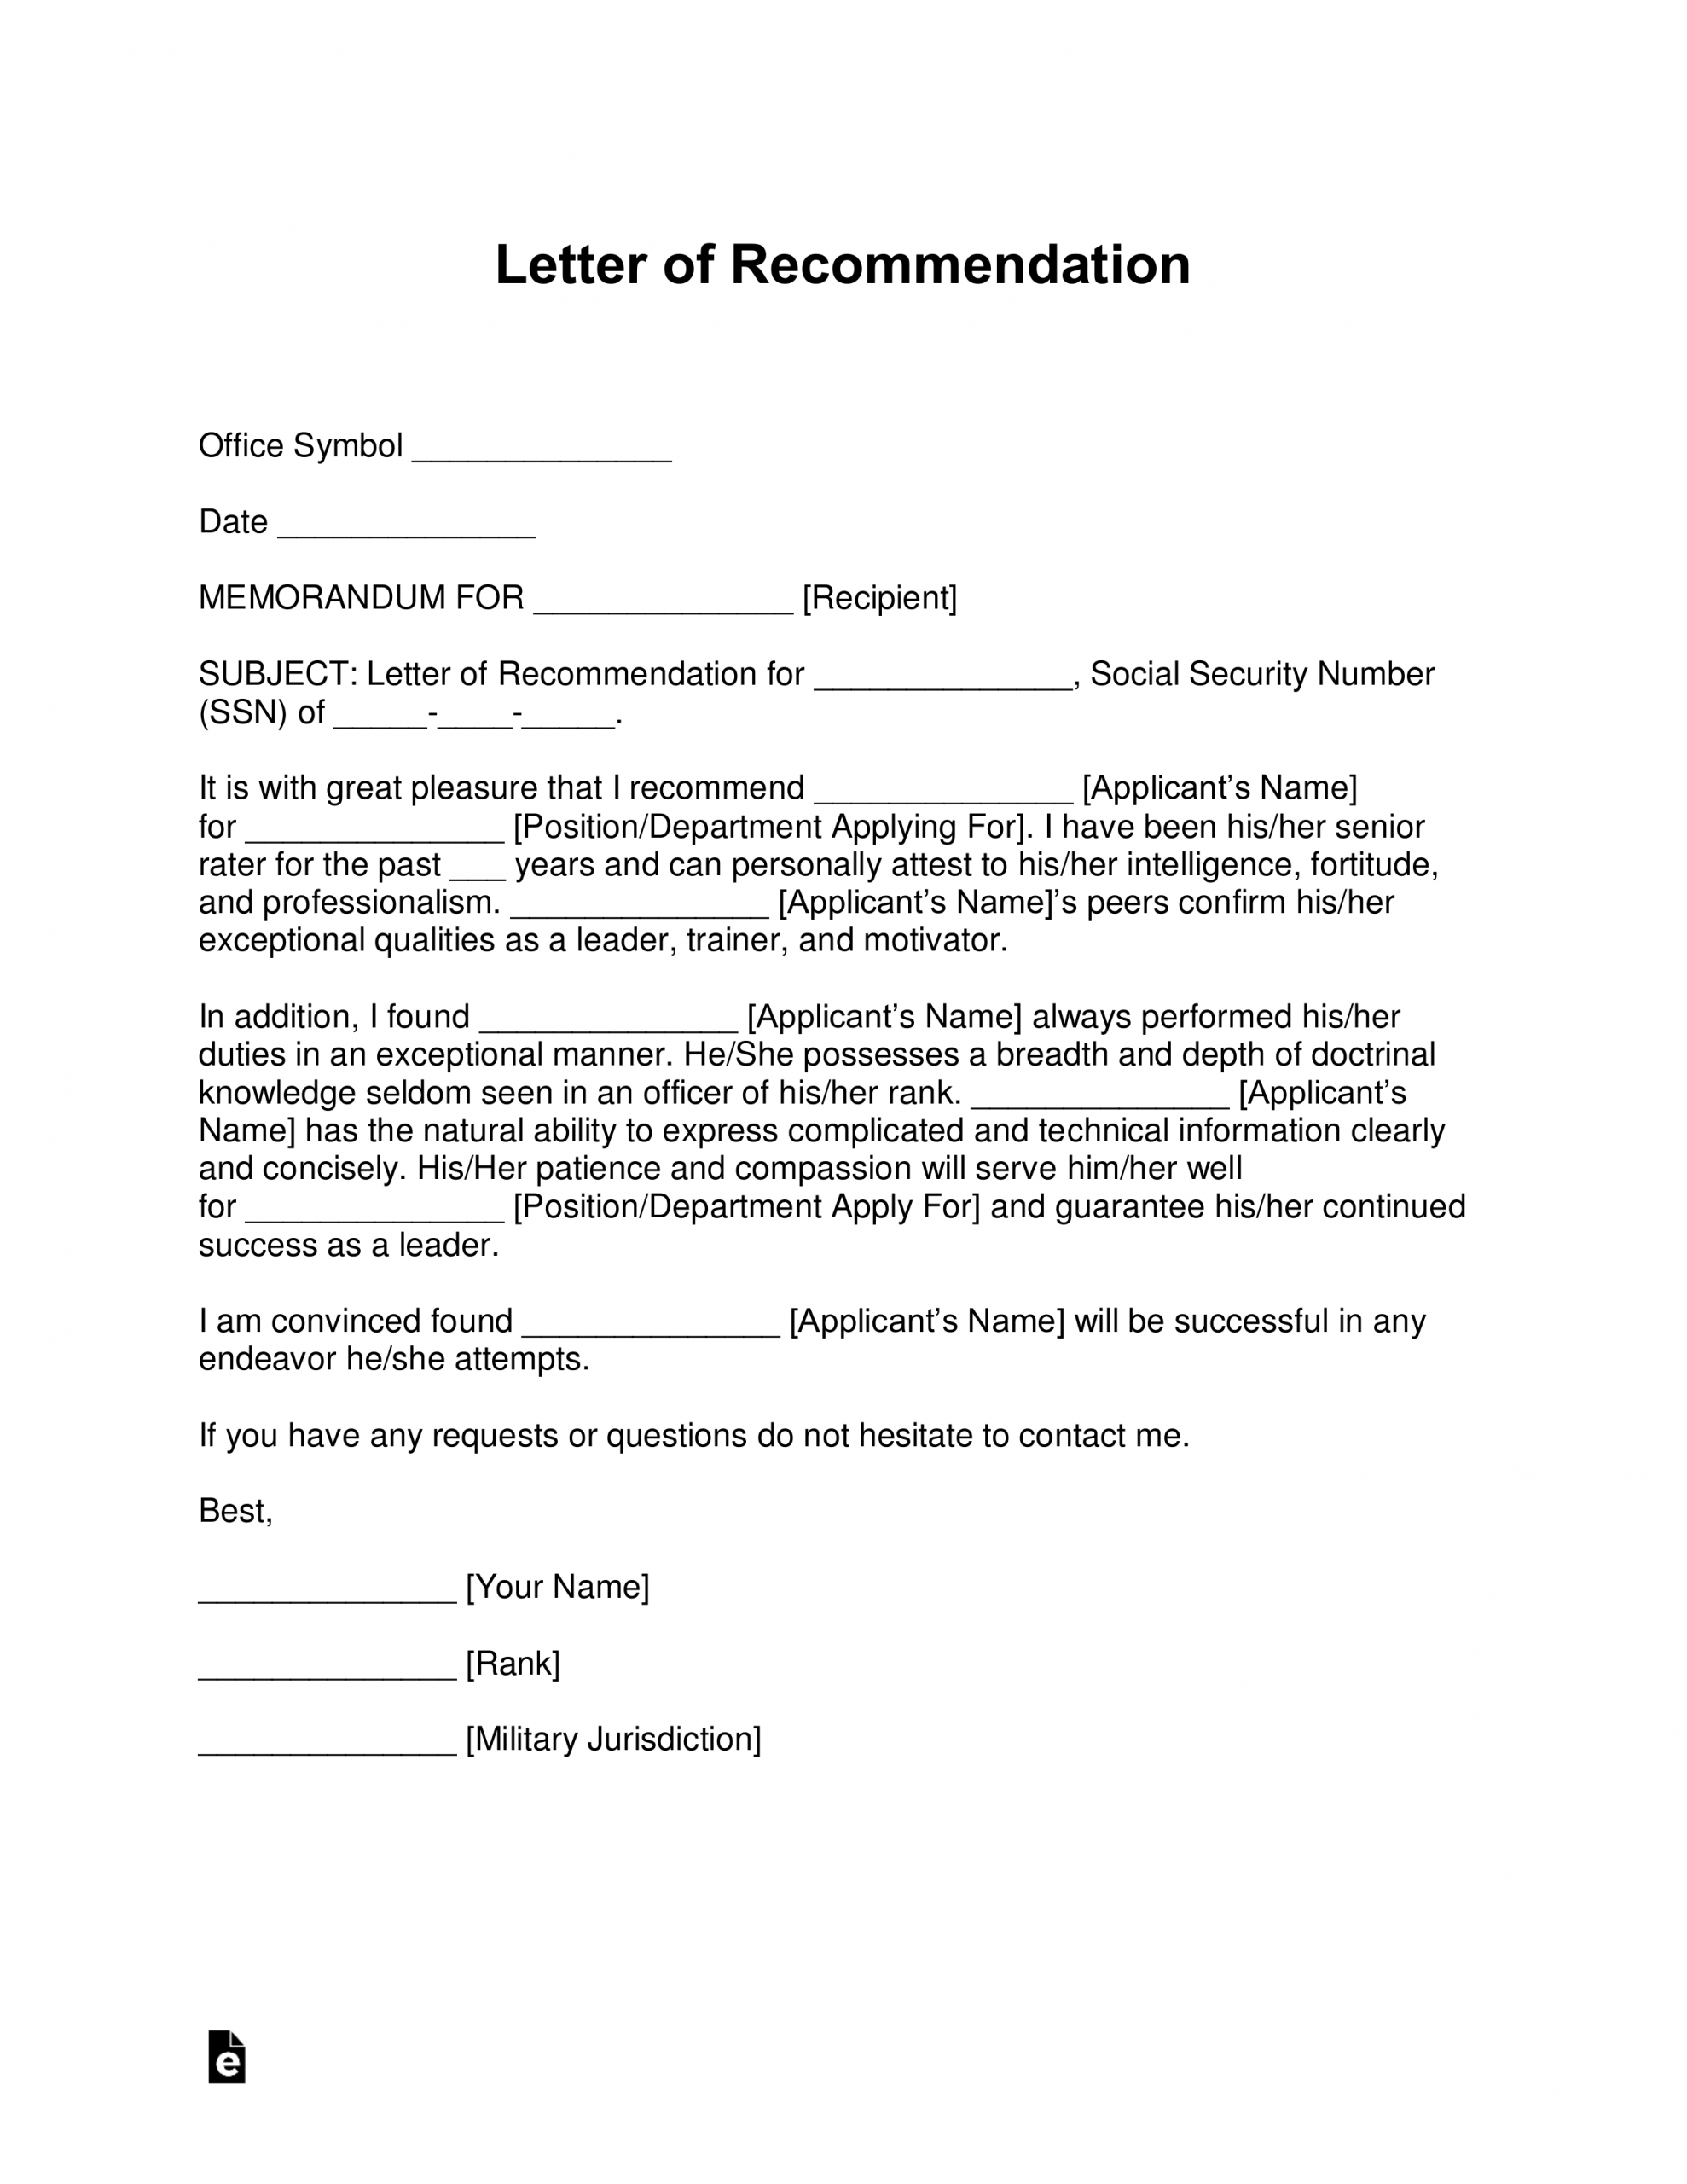 Example Letter Of Recommendation For Military Officer Akali within size 2550 X 3301